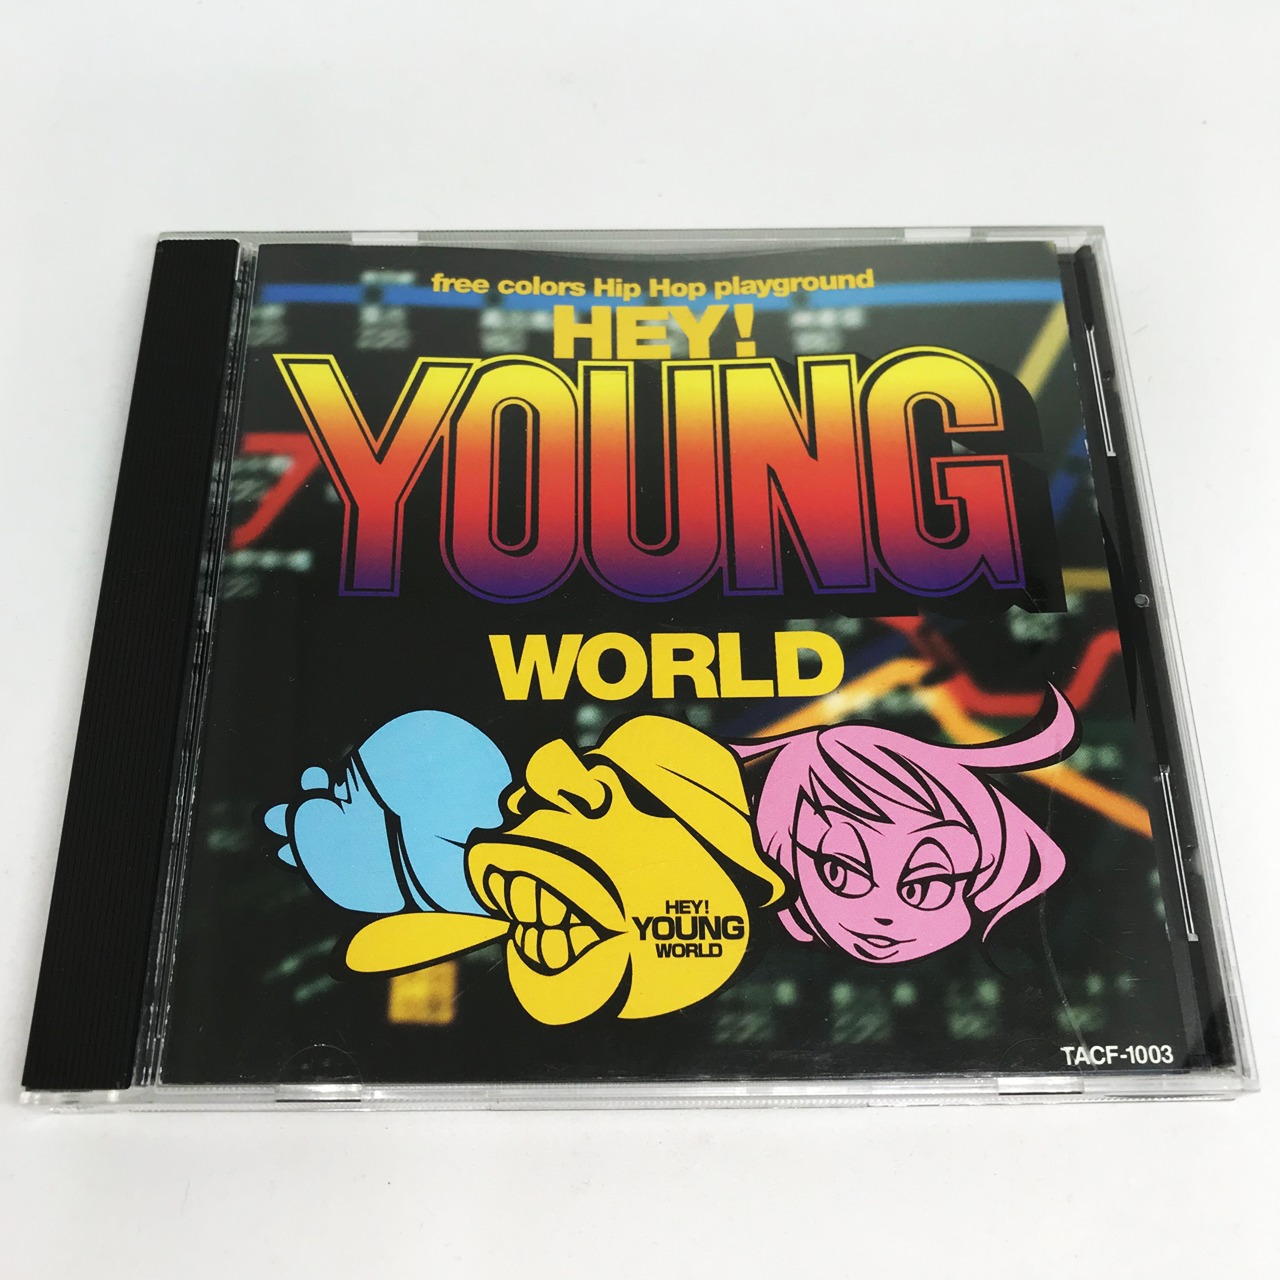 HEY!YOUNG WORLD